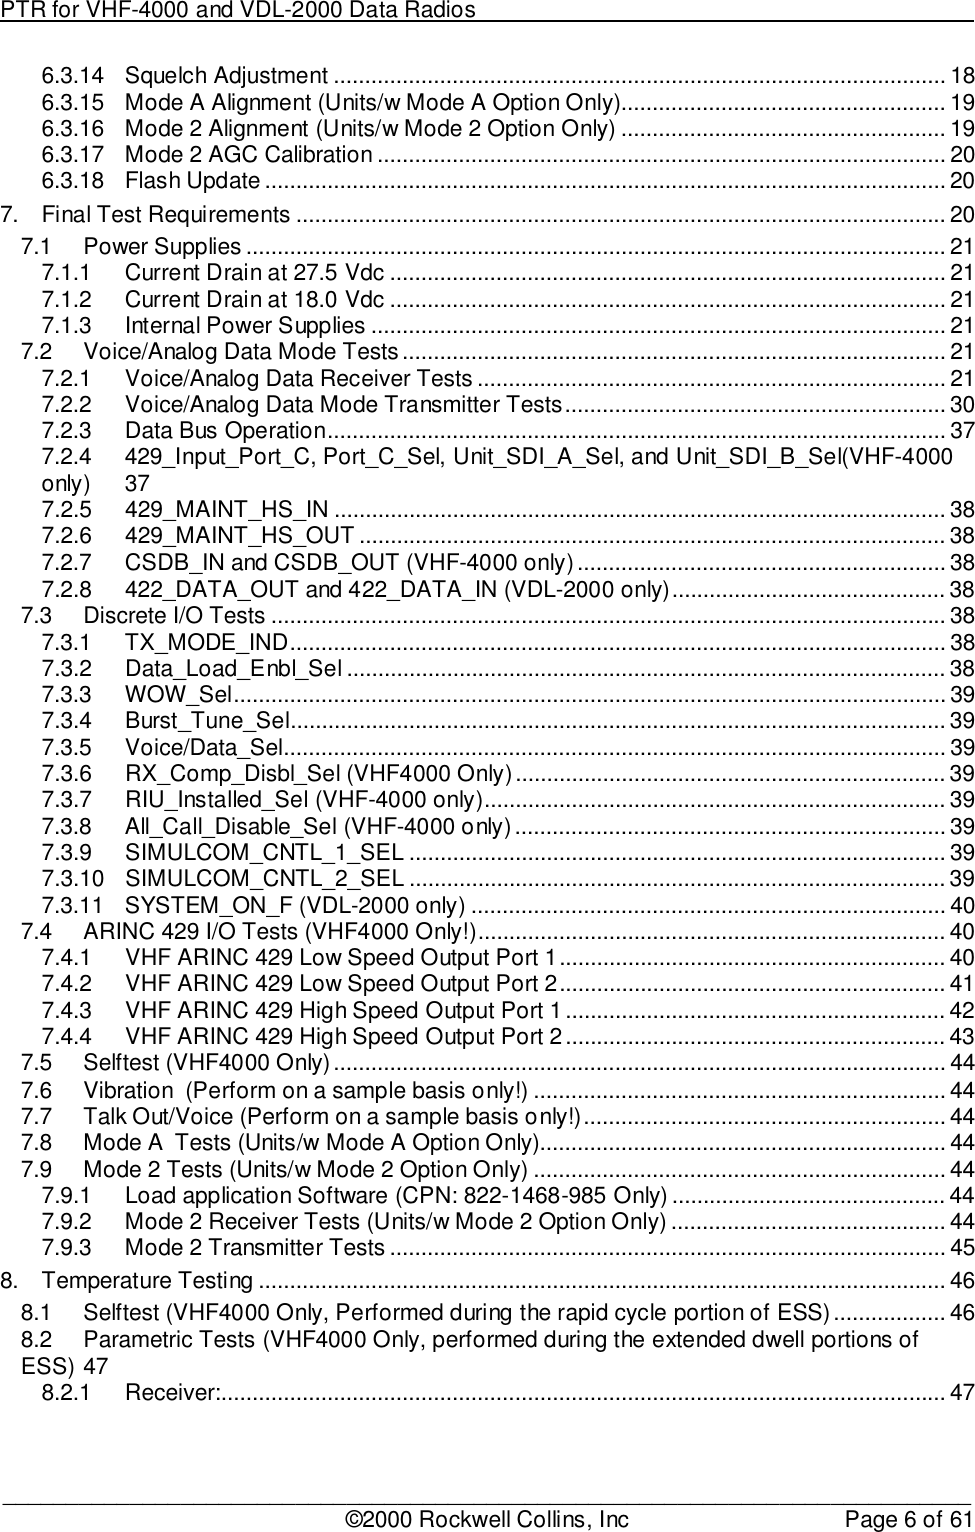 PTR for VHF-4000 and VDL-2000 Data Radios                                                                                ____________________________________________________________________________©2000 Rockwell Collins, Inc Page 6 of 616.3.14 Squelch Adjustment .................................................................................................. 186.3.15 Mode A Alignment (Units/w Mode A Option Only).................................................... 196.3.16 Mode 2 Alignment (Units/w Mode 2 Option Only) .................................................... 196.3.17 Mode 2 AGC Calibration ........................................................................................... 206.3.18 Flash Update ............................................................................................................. 207. Final Test Requirements ........................................................................................................ 207.1 Power Supplies ................................................................................................................ 217.1.1 Current Drain at 27.5 Vdc ......................................................................................... 217.1.2 Current Drain at 18.0 Vdc ......................................................................................... 217.1.3 Internal Power Supplies ............................................................................................ 217.2 Voice/Analog Data Mode Tests ....................................................................................... 217.2.1 Voice/Analog Data Receiver Tests ........................................................................... 217.2.2 Voice/Analog Data Mode Transmitter Tests............................................................. 307.2.3 Data Bus Operation................................................................................................... 377.2.4 429_Input_Port_C, Port_C_Sel, Unit_SDI_A_Sel, and Unit_SDI_B_Sel(VHF-4000only) 377.2.5 429_MAINT_HS_IN .................................................................................................. 387.2.6 429_MAINT_HS_OUT .............................................................................................. 387.2.7 CSDB_IN and CSDB_OUT (VHF-4000 only)........................................................... 387.2.8 422_DATA_OUT and 422_DATA_IN (VDL-2000 only)............................................ 387.3 Discrete I/O Tests ............................................................................................................ 387.3.1 TX_MODE_IND......................................................................................................... 387.3.2 Data_Load_Enbl_Sel ................................................................................................ 387.3.3 WOW_Sel.................................................................................................................. 397.3.4 Burst_Tune_Sel......................................................................................................... 397.3.5 Voice/Data_Sel.......................................................................................................... 397.3.6 RX_Comp_Disbl_Sel (VHF4000 Only)..................................................................... 397.3.7 RIU_Installed_Sel (VHF-4000 only).......................................................................... 397.3.8 All_Call_Disable_Sel (VHF-4000 only)..................................................................... 397.3.9 SIMULCOM_CNTL_1_SEL ...................................................................................... 397.3.10 SIMULCOM_CNTL_2_SEL ...................................................................................... 397.3.11 SYSTEM_ON_F (VDL-2000 only) ............................................................................ 407.4 ARINC 429 I/O Tests (VHF4000 Only!)........................................................................... 407.4.1 VHF ARINC 429 Low Speed Output Port 1.............................................................. 407.4.2 VHF ARINC 429 Low Speed Output Port 2.............................................................. 417.4.3 VHF ARINC 429 High Speed Output Port 1............................................................. 427.4.4 VHF ARINC 429 High Speed Output Port 2............................................................. 437.5 Selftest (VHF4000 Only).................................................................................................. 447.6 Vibration  (Perform on a sample basis only!) .................................................................. 447.7 Talk Out/Voice (Perform on a sample basis only!).......................................................... 447.8 Mode A  Tests (Units/w Mode A Option Only)................................................................. 447.9 Mode 2 Tests (Units/w Mode 2 Option Only) .................................................................. 447.9.1 Load application Software (CPN: 822-1468-985 Only) ............................................ 447.9.2 Mode 2 Receiver Tests (Units/w Mode 2 Option Only) ............................................ 447.9.3 Mode 2 Transmitter Tests ......................................................................................... 458. Temperature Testing .............................................................................................................. 468.1 Selftest (VHF4000 Only, Performed during the rapid cycle portion of ESS).................. 468.2 Parametric Tests (VHF4000 Only, performed during the extended dwell portions ofESS) 478.2.1 Receiver:.................................................................................................................... 47